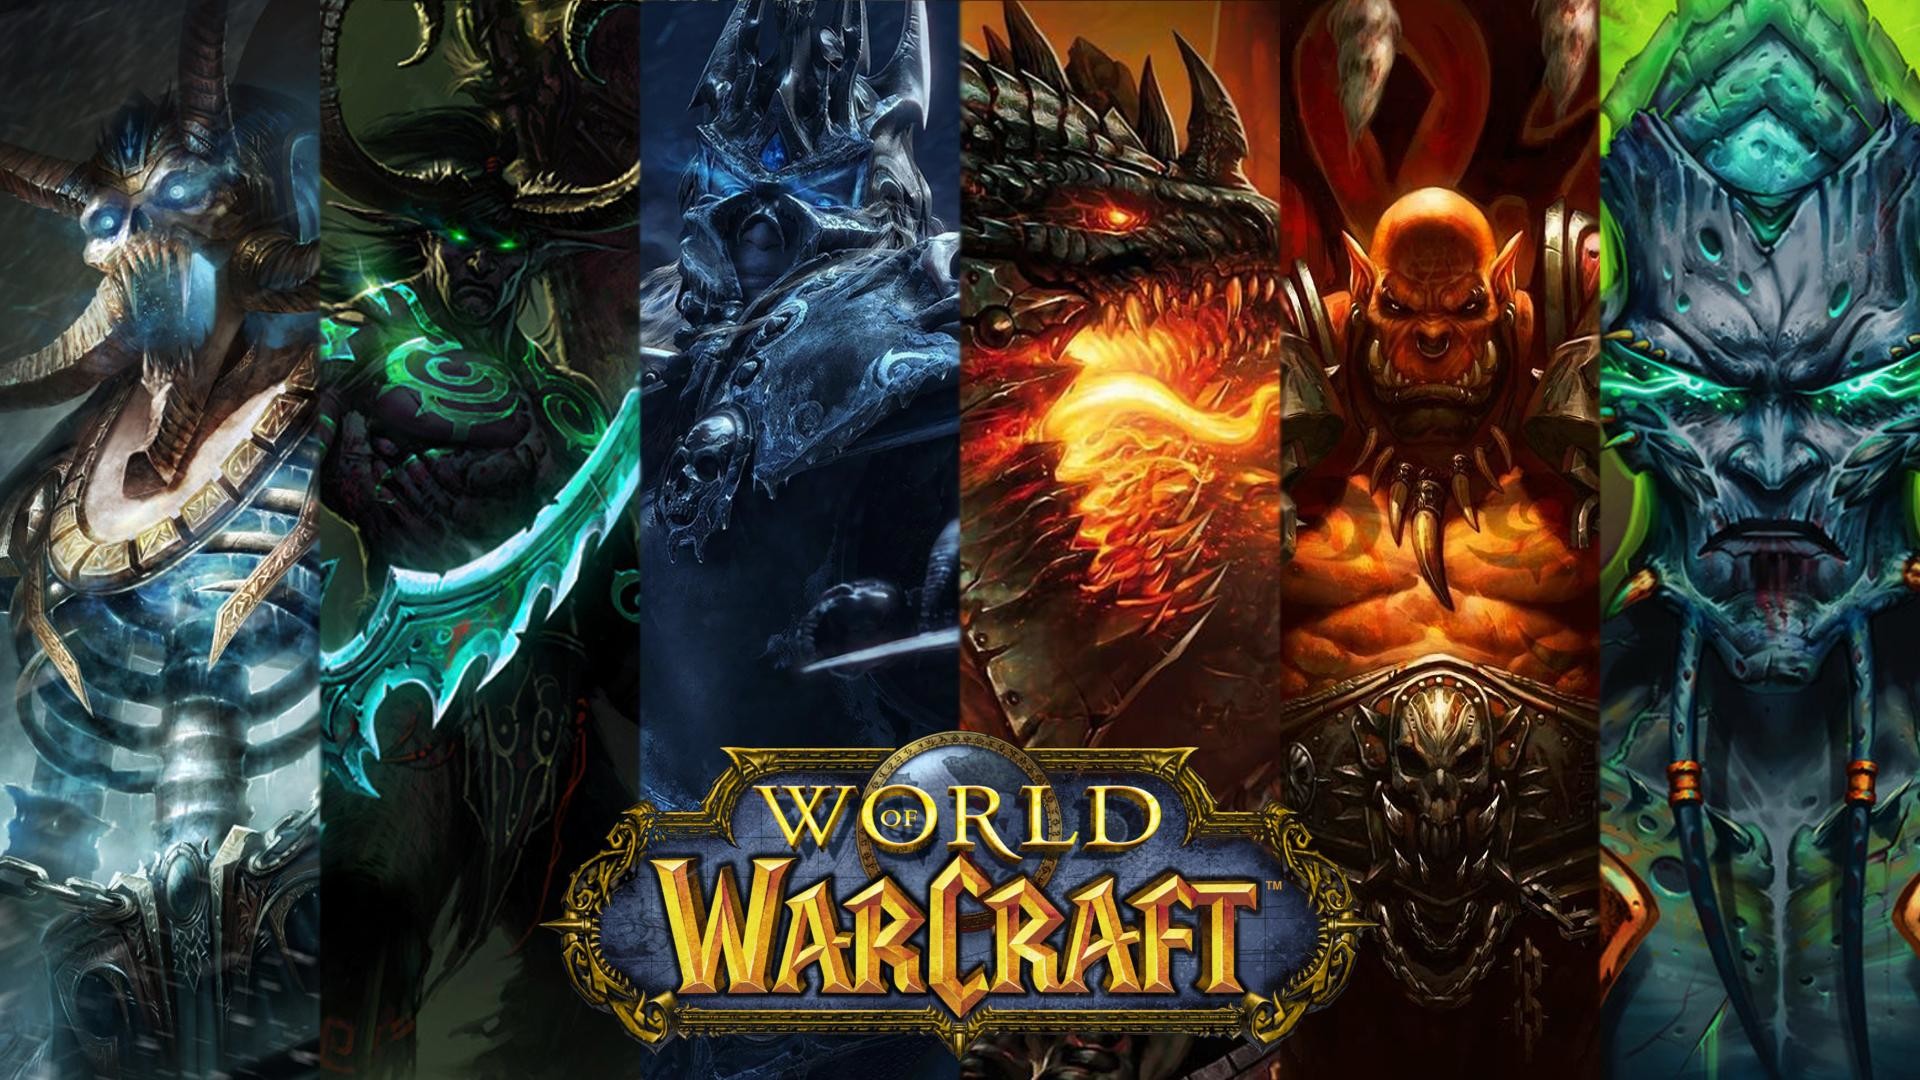 1920x1080 ImageSomeone requested an updated WoW Wallpaper, here's what I came up with.